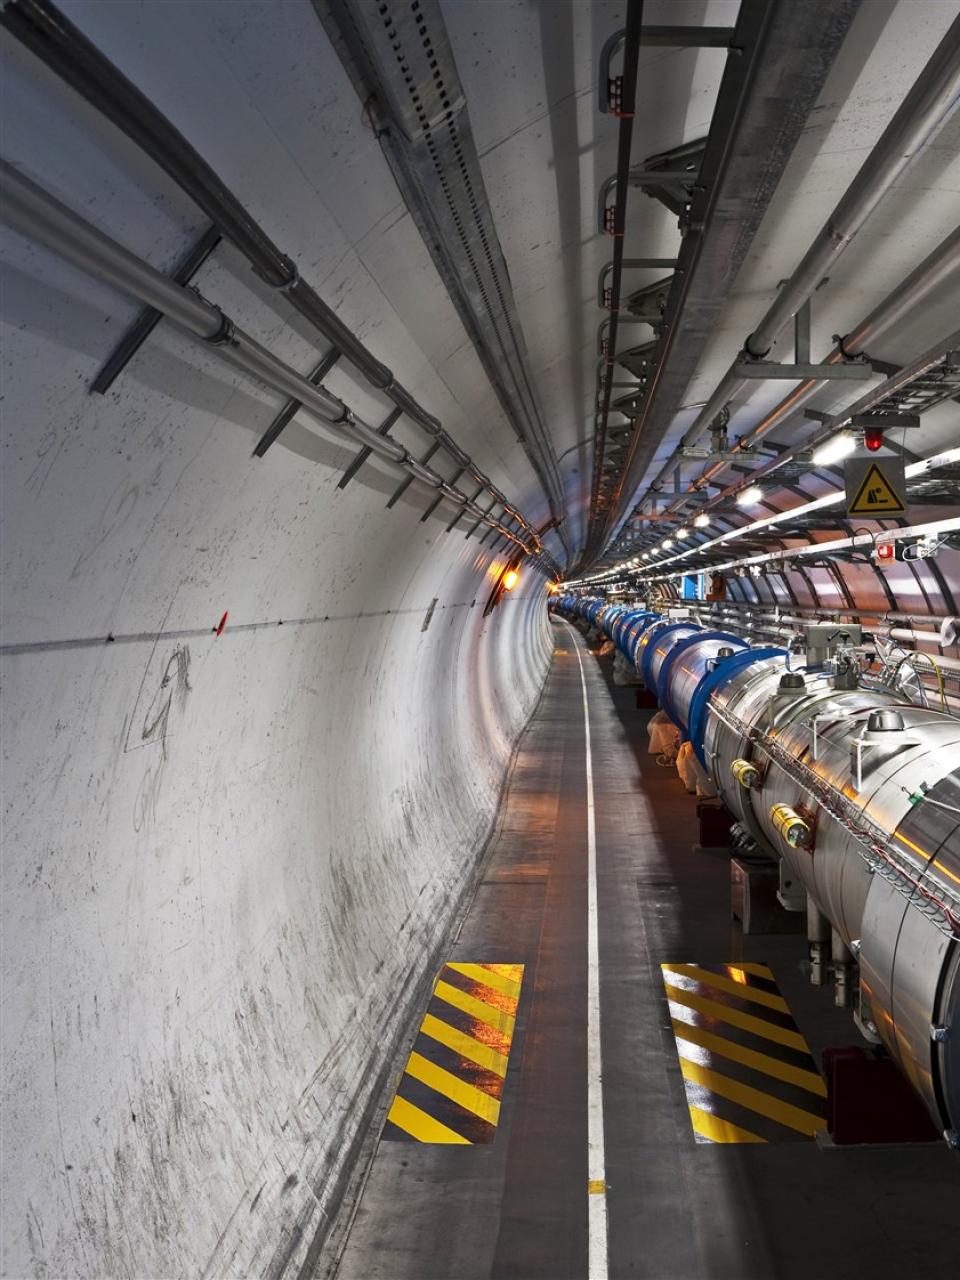 The tunnel of the Large Hadron Collider (LHC).